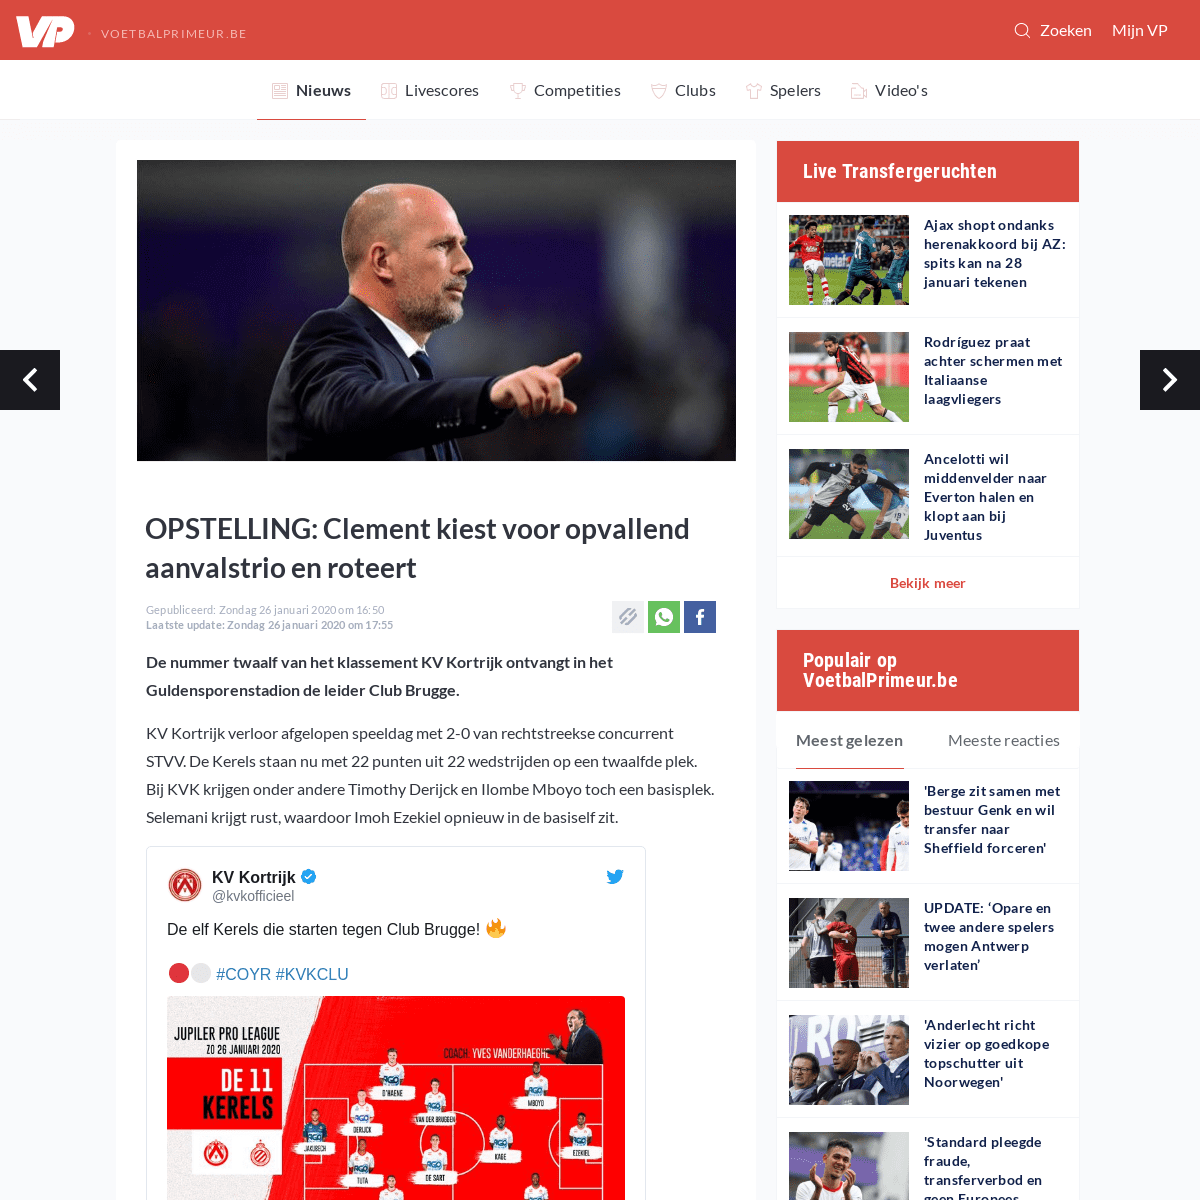 A complete backup of www.voetbalprimeur.be/nieuws/913624/opstelling-kvk-club-brugge.html